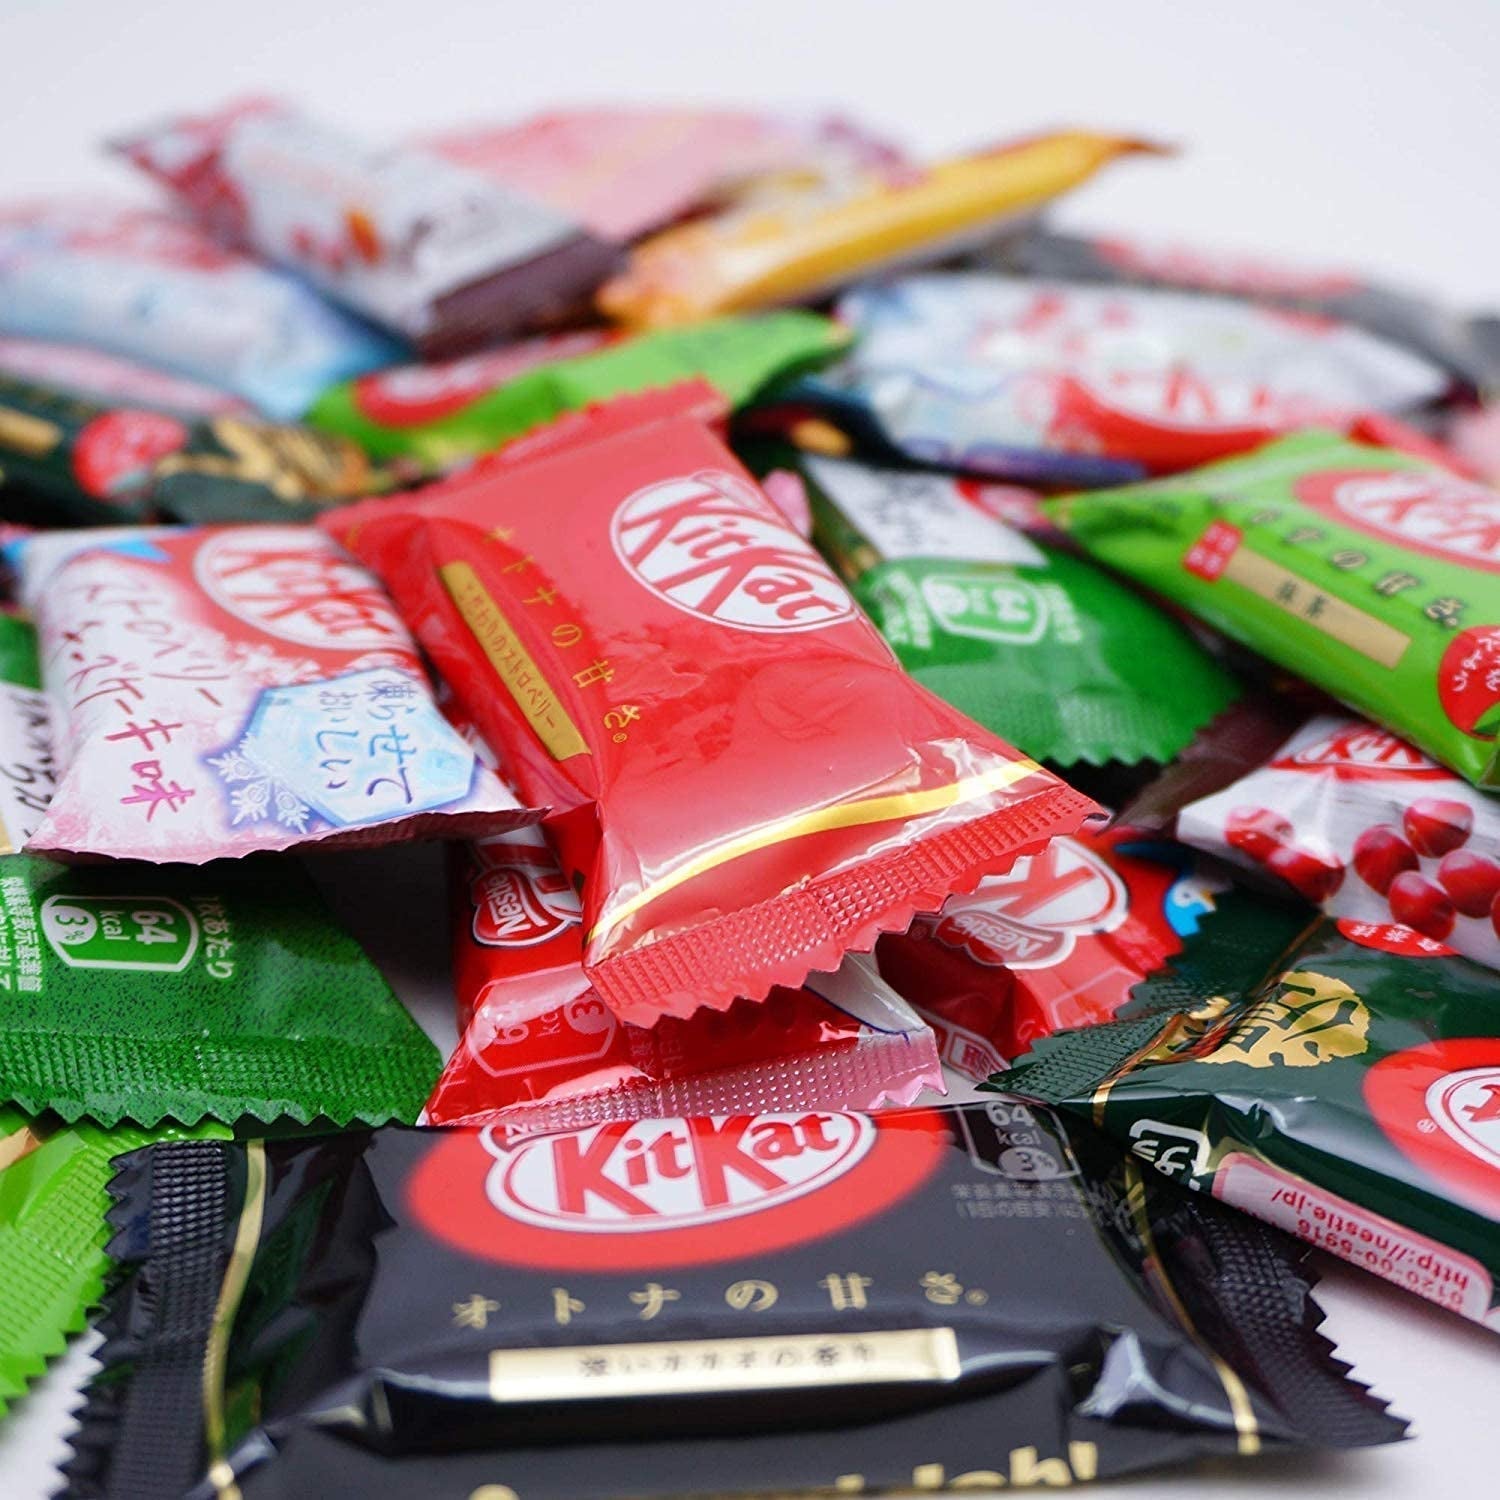 The Ultimate Japanese Kit Kat List - Unveiling 50 Flavors